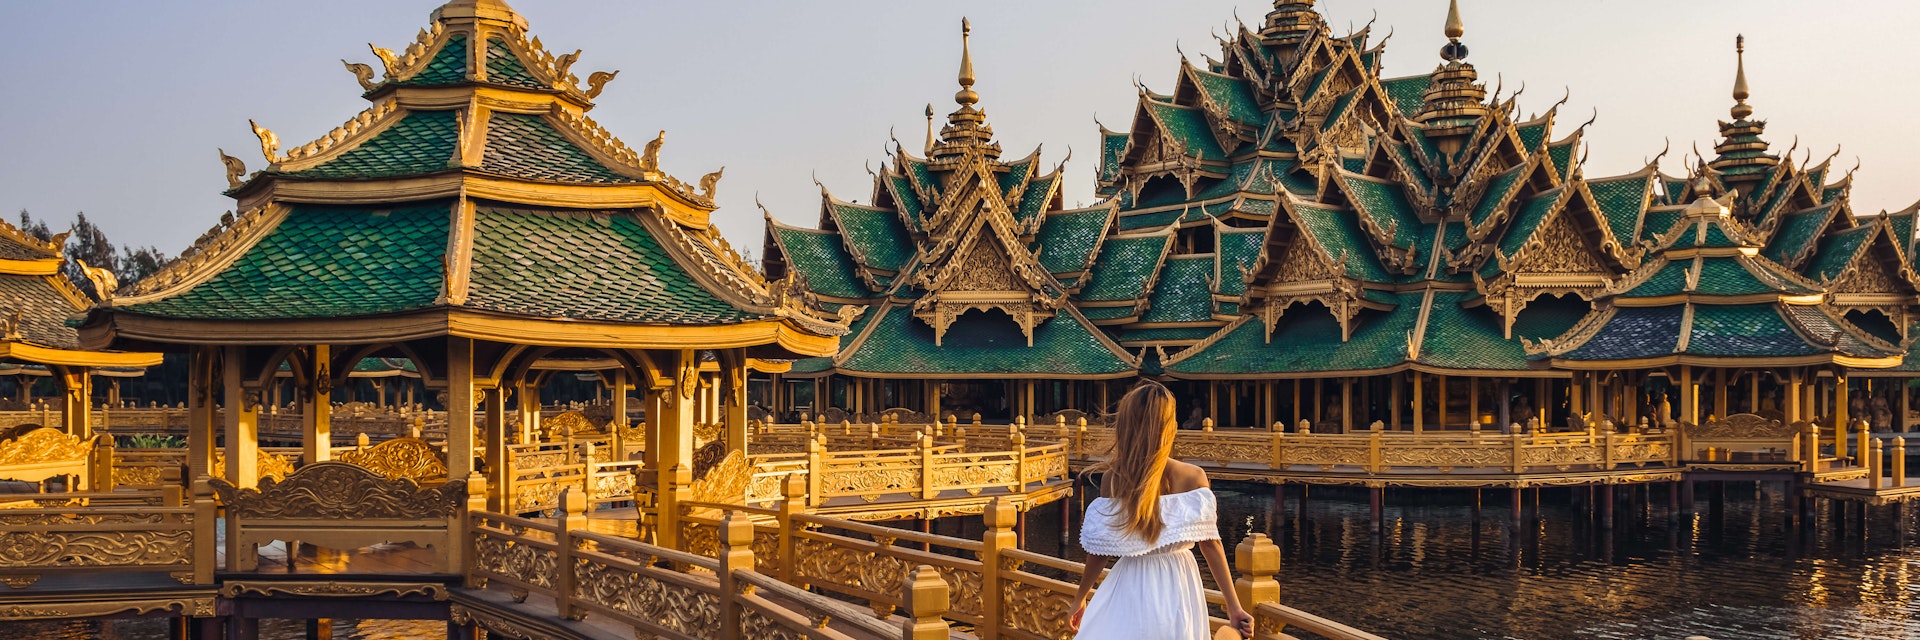 Woman walking on a bridge to Buddhist temple in Thailand during sunset.